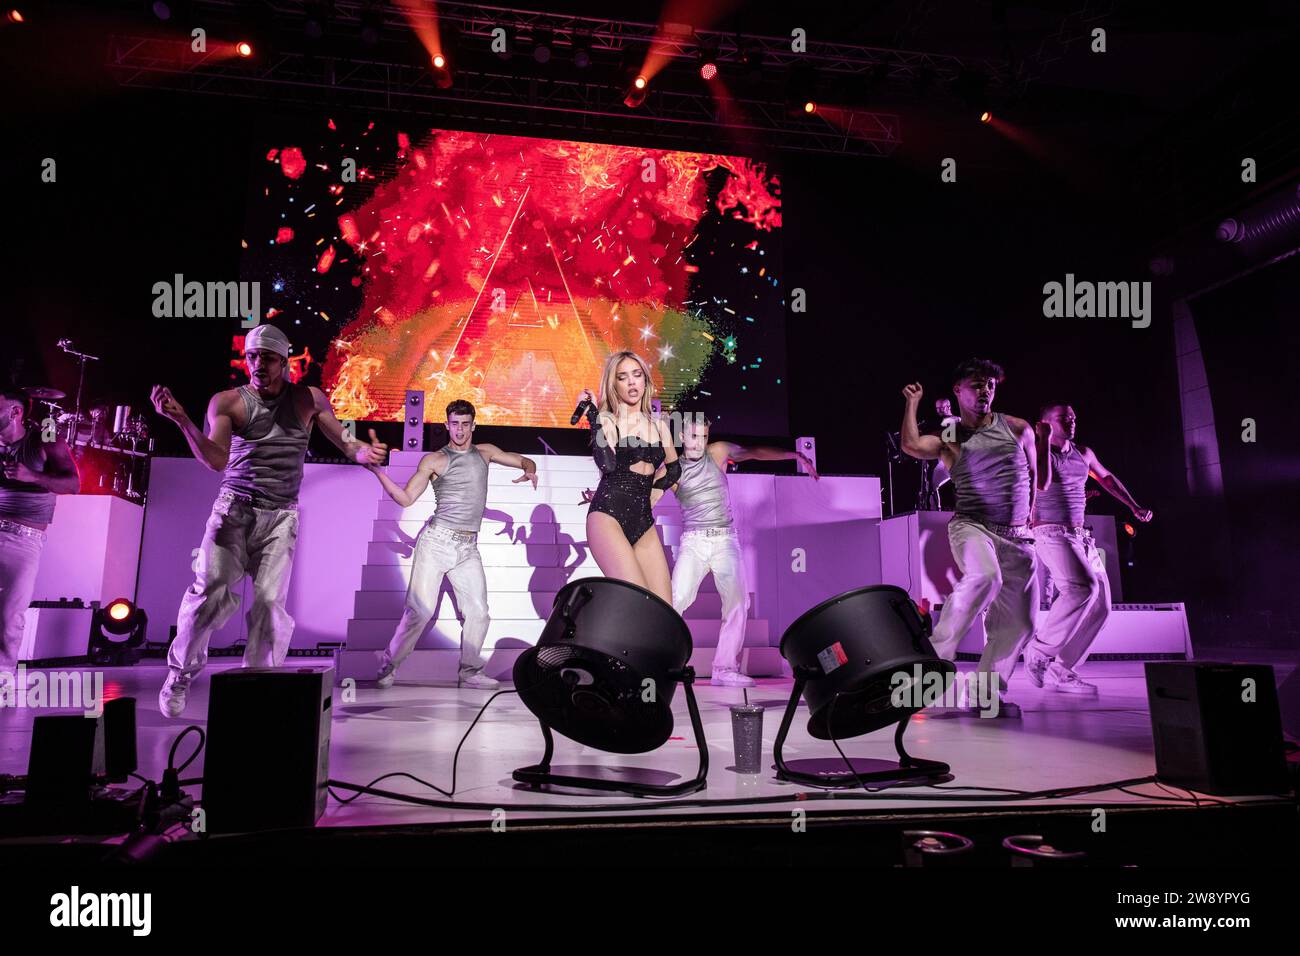 Barcelona, Spain. 2023.12.12. Ana Mena perform on stage during Bellodrama Tour at Sant Jordi Club on December 22, 2023 in Barcelona, Spain. Stock Photo